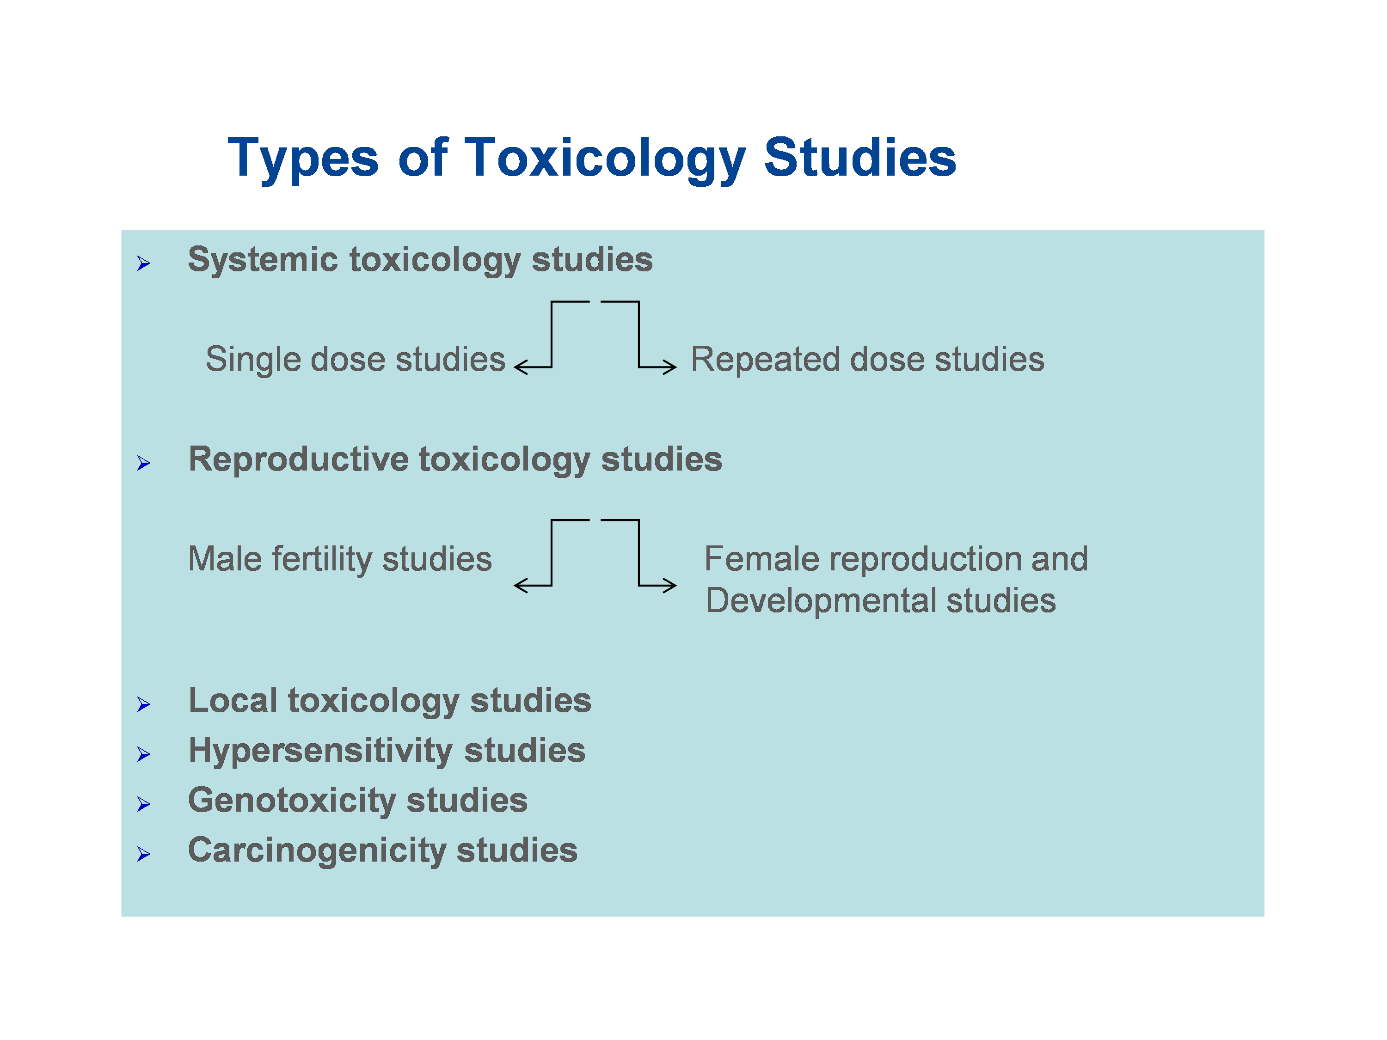 Types of toxicology (nonclinical safety) studies.